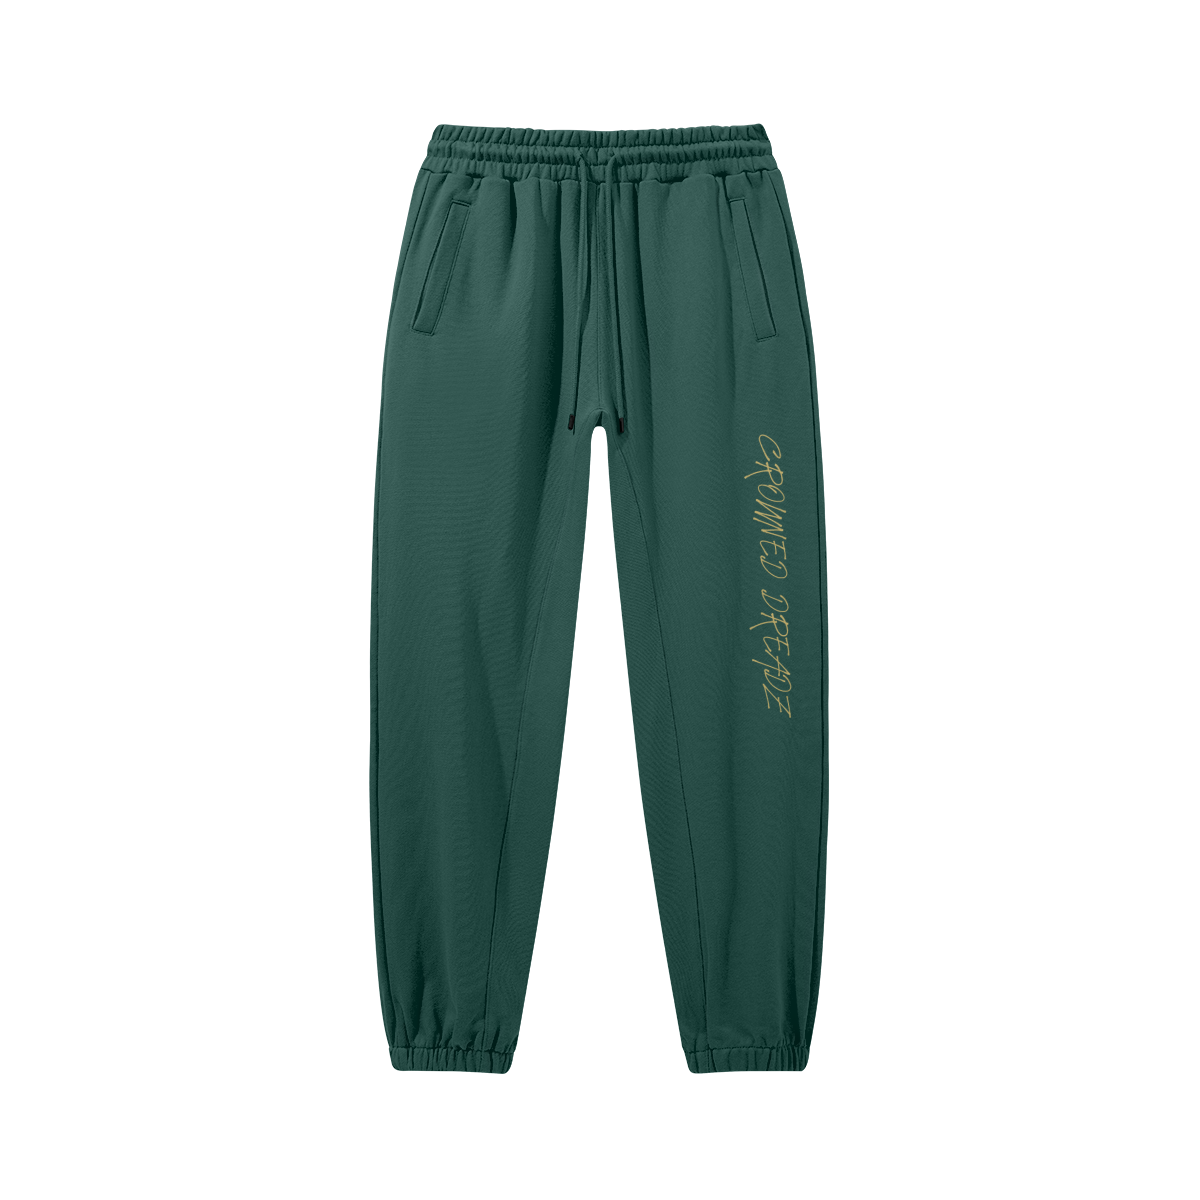 Mineral Green - Crowned Dreadz 380GSM Unisex Heavyweight Baggy Sweatpants - unisex sweatpants at TFC&H Co.